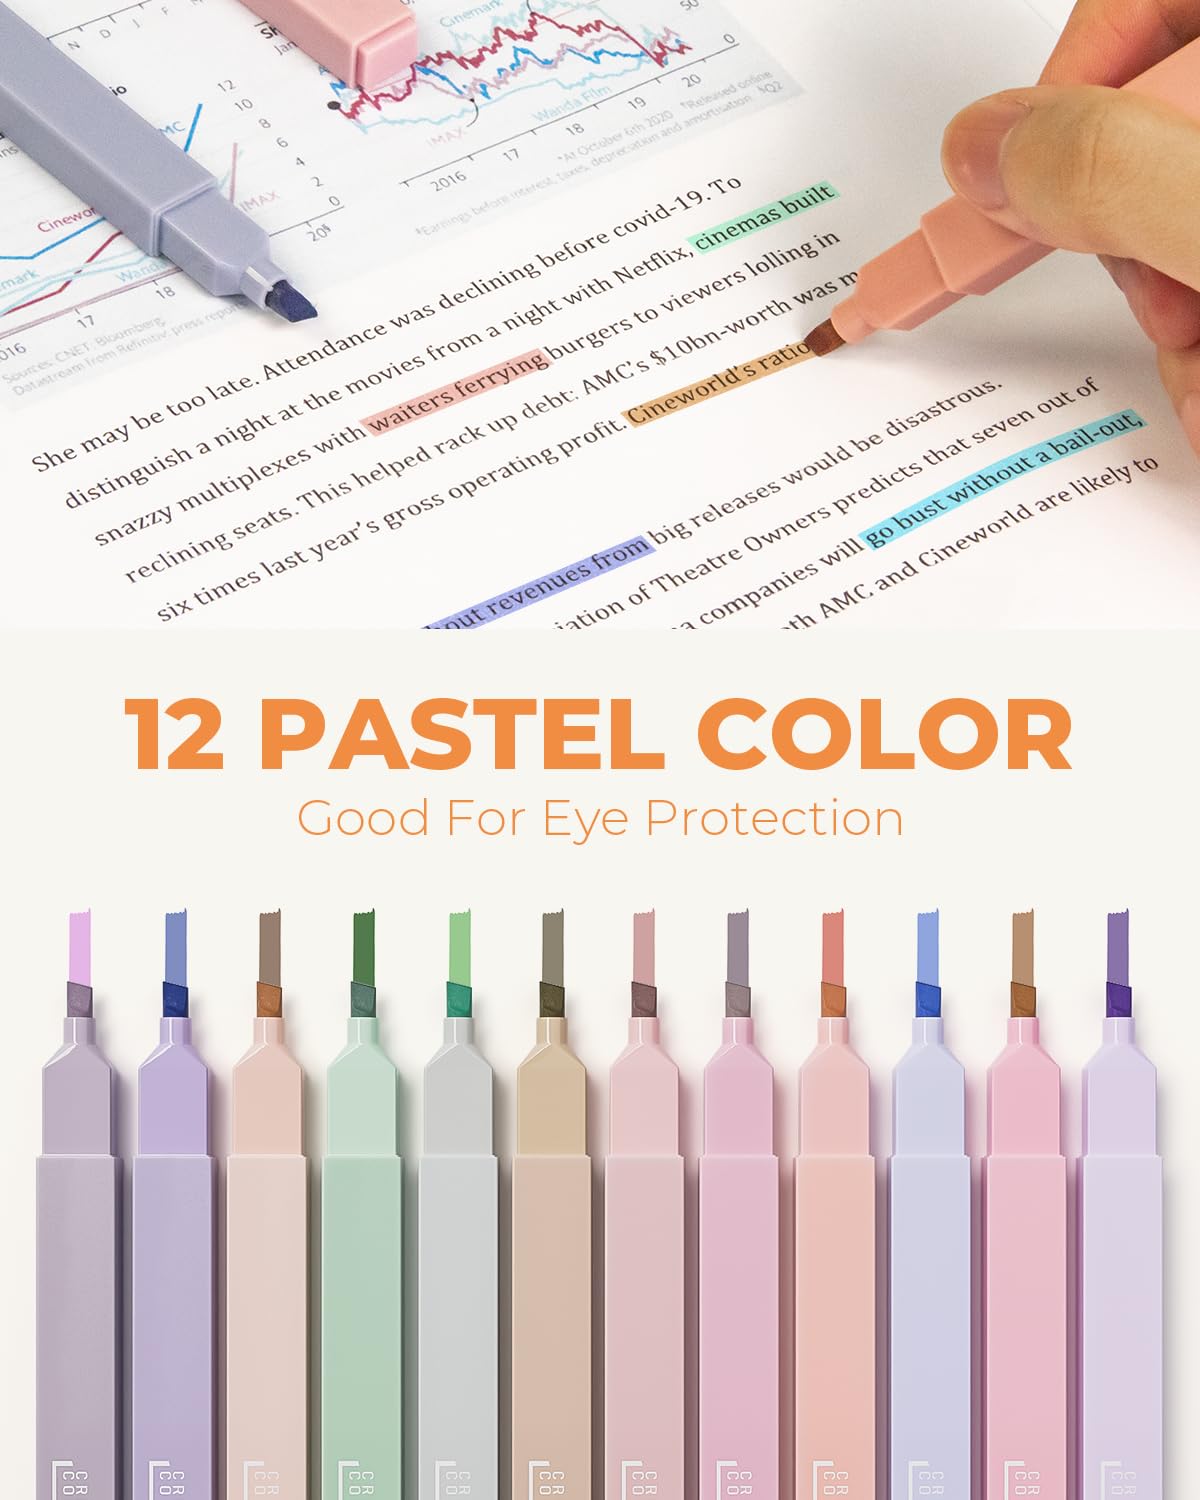 Nicpro Pastel Highlighters, 12PCS Aesthetic Cute Highlighters with Soft Chisel Tip Fast Dry & No Bleed Bible Highlighters, Aesthetic School Supplies for Teens & College Students